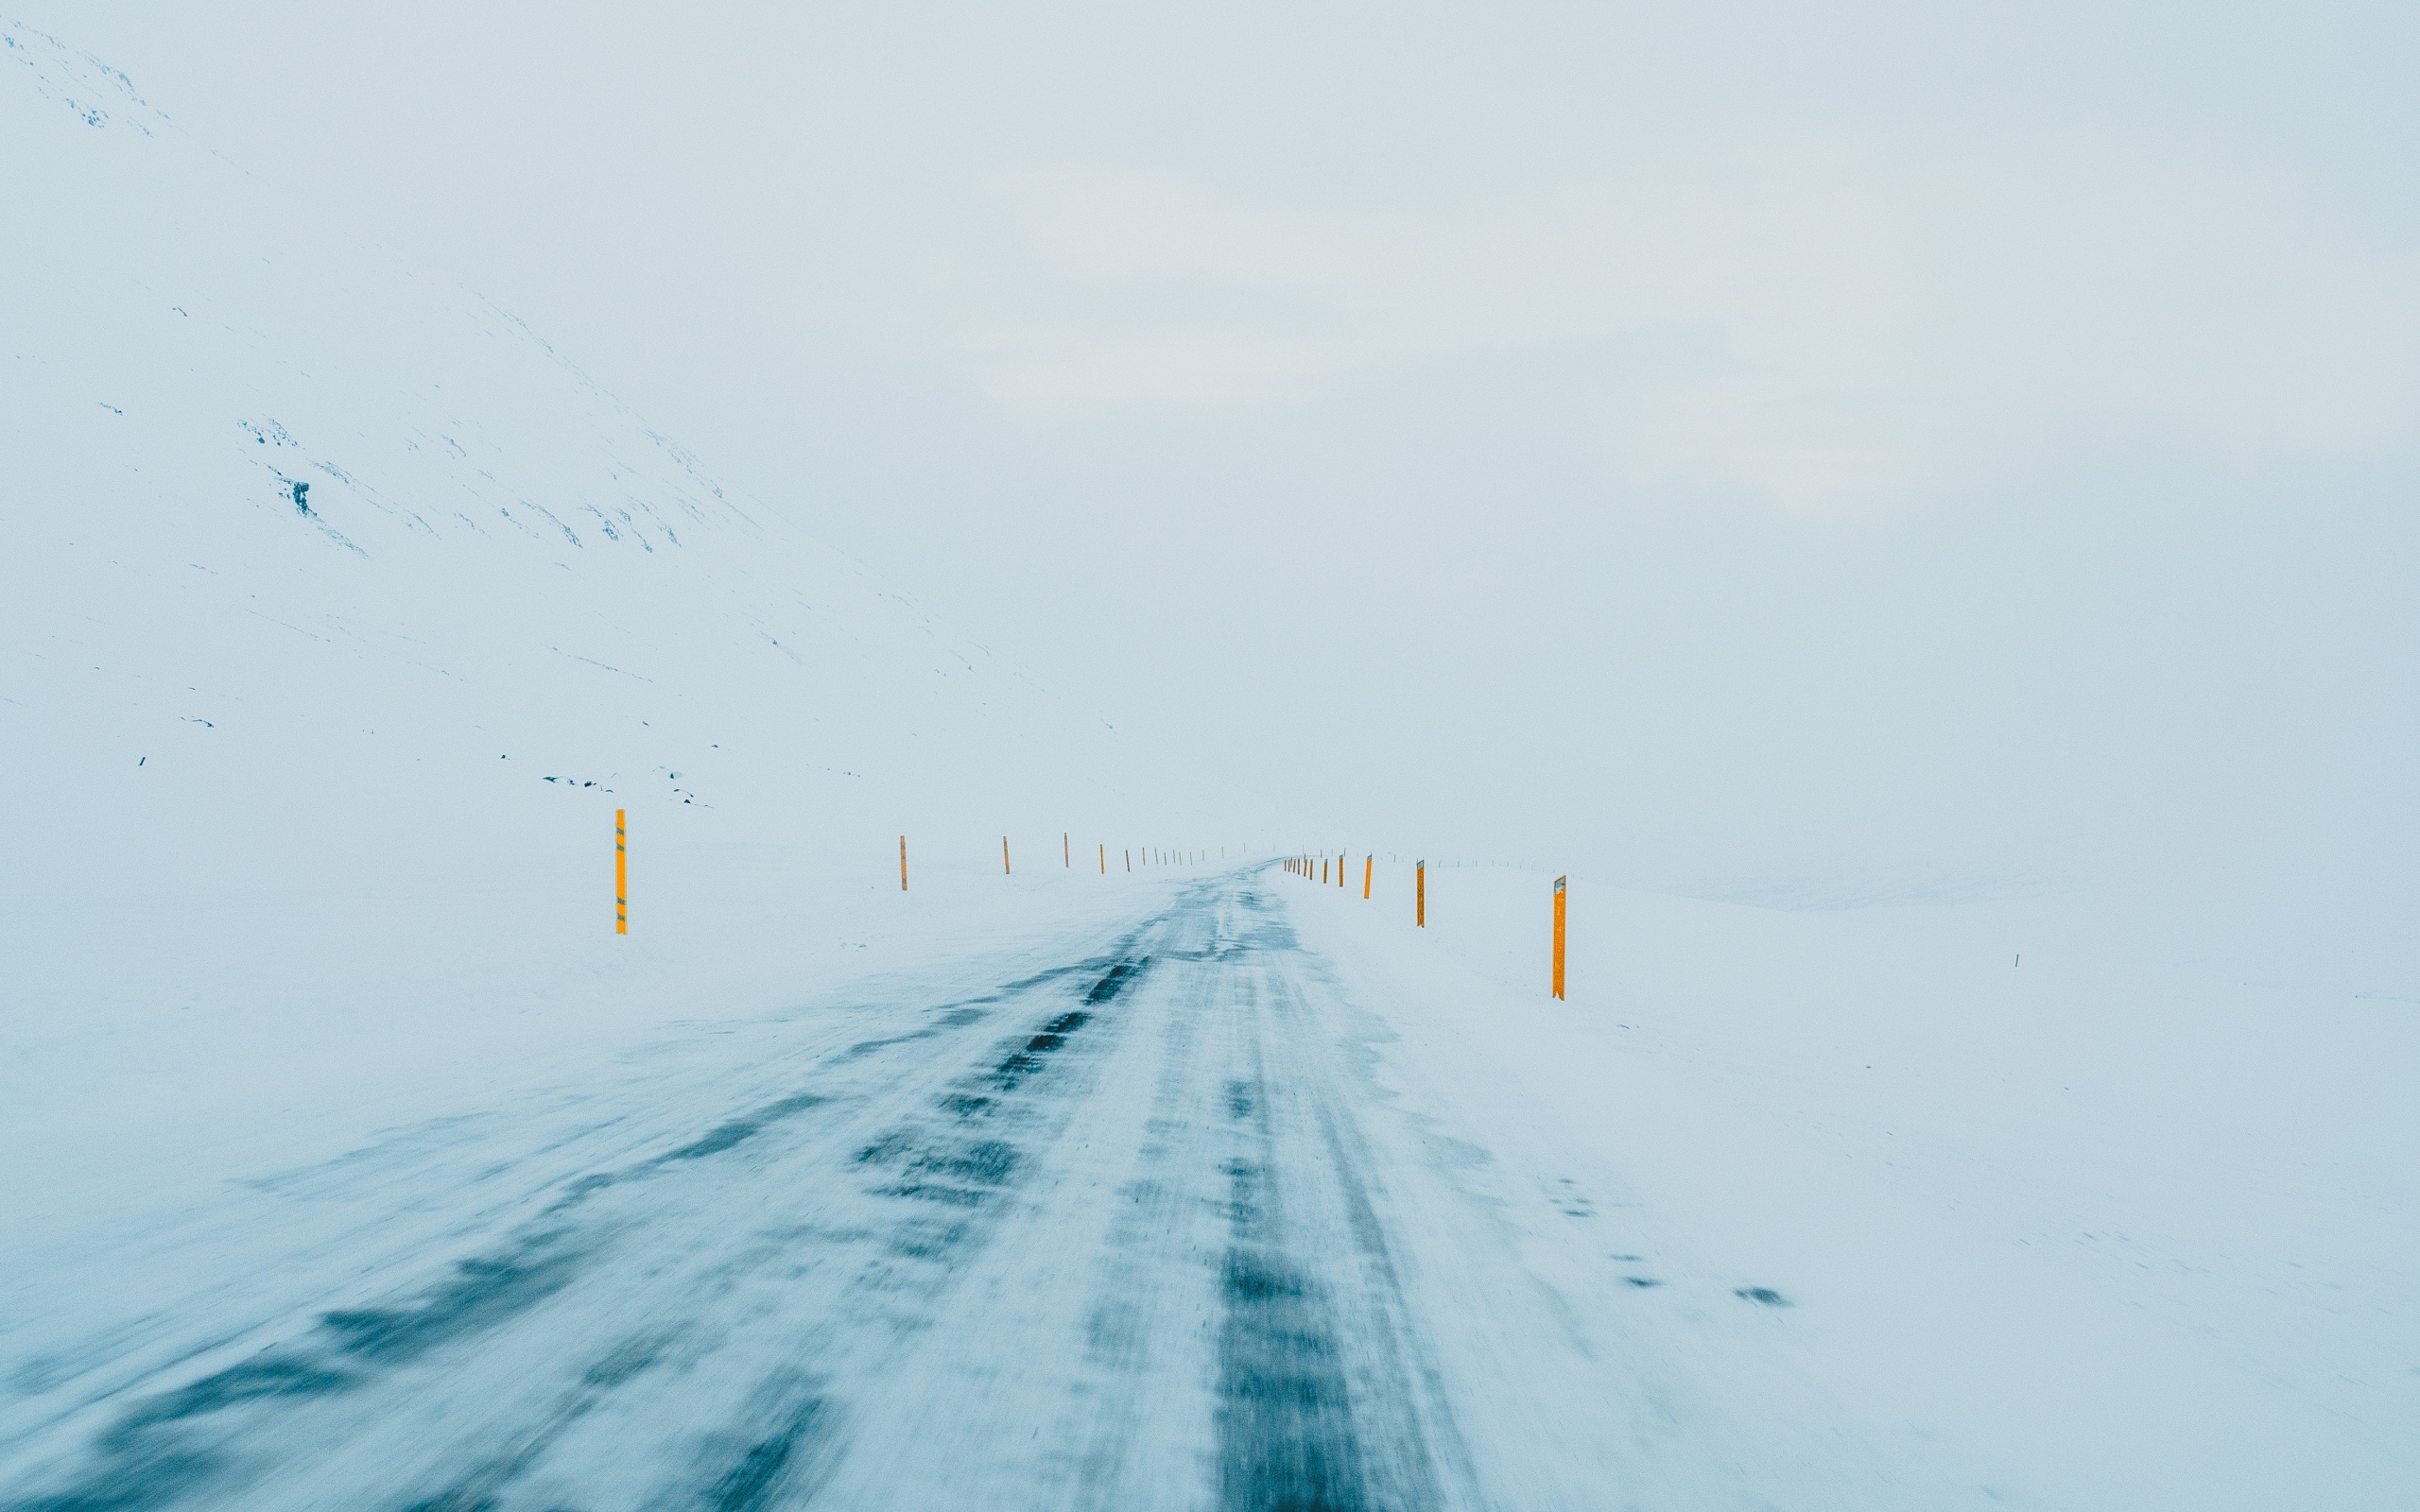 Wallpaper Of Nature, Road, Snow, Winter Background - HD Wallpaper 